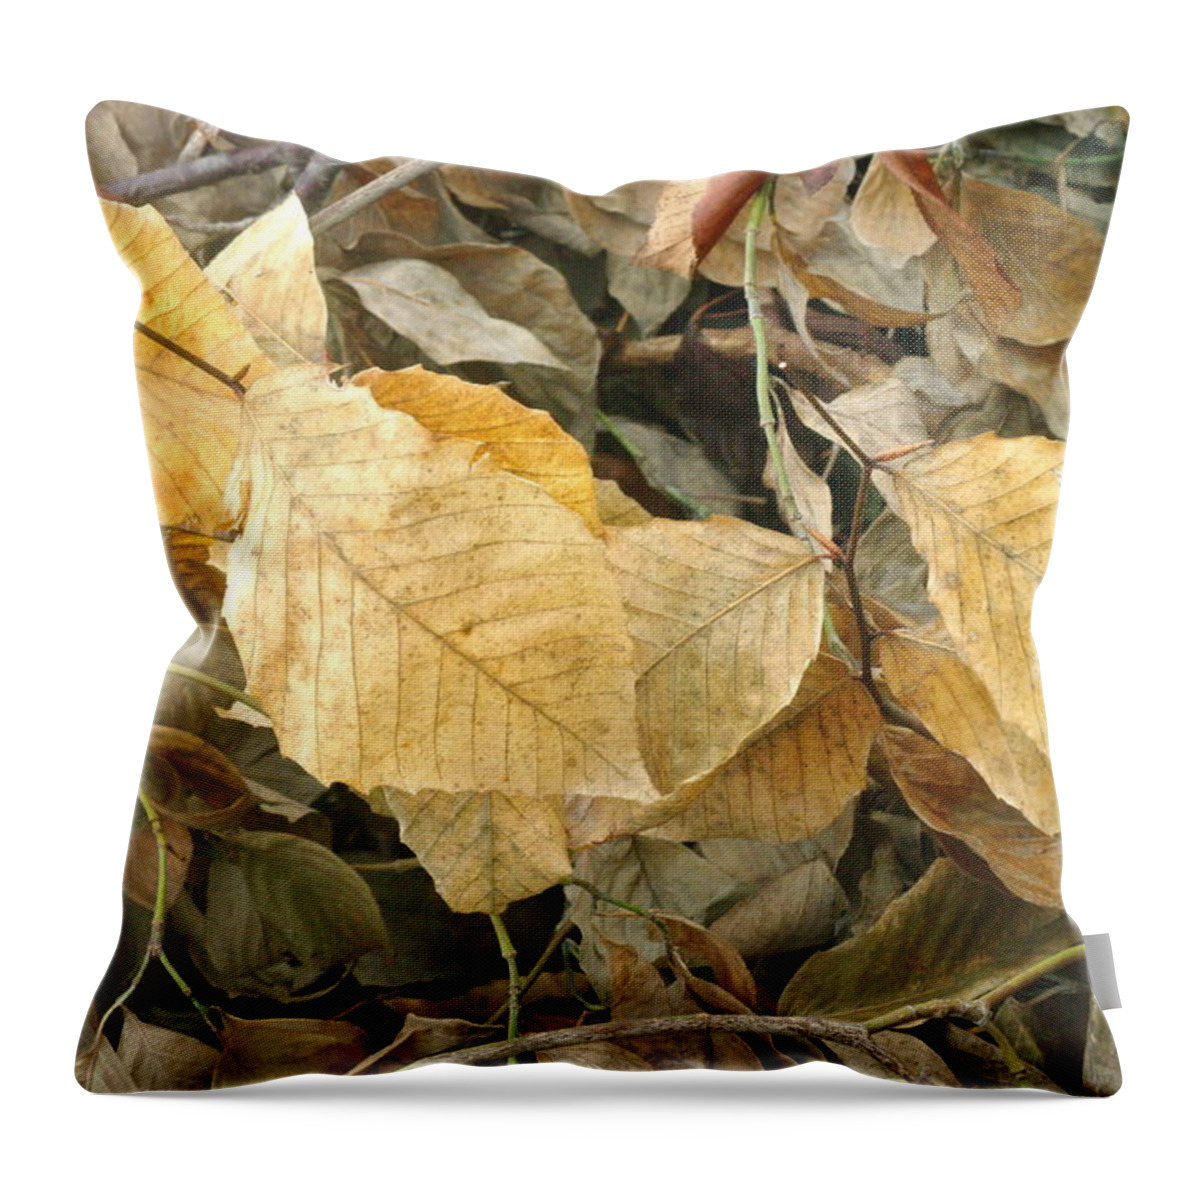 Leaves Throw Pillow featuring the photograph Dried Leaf Still Life by Suzanne Powers